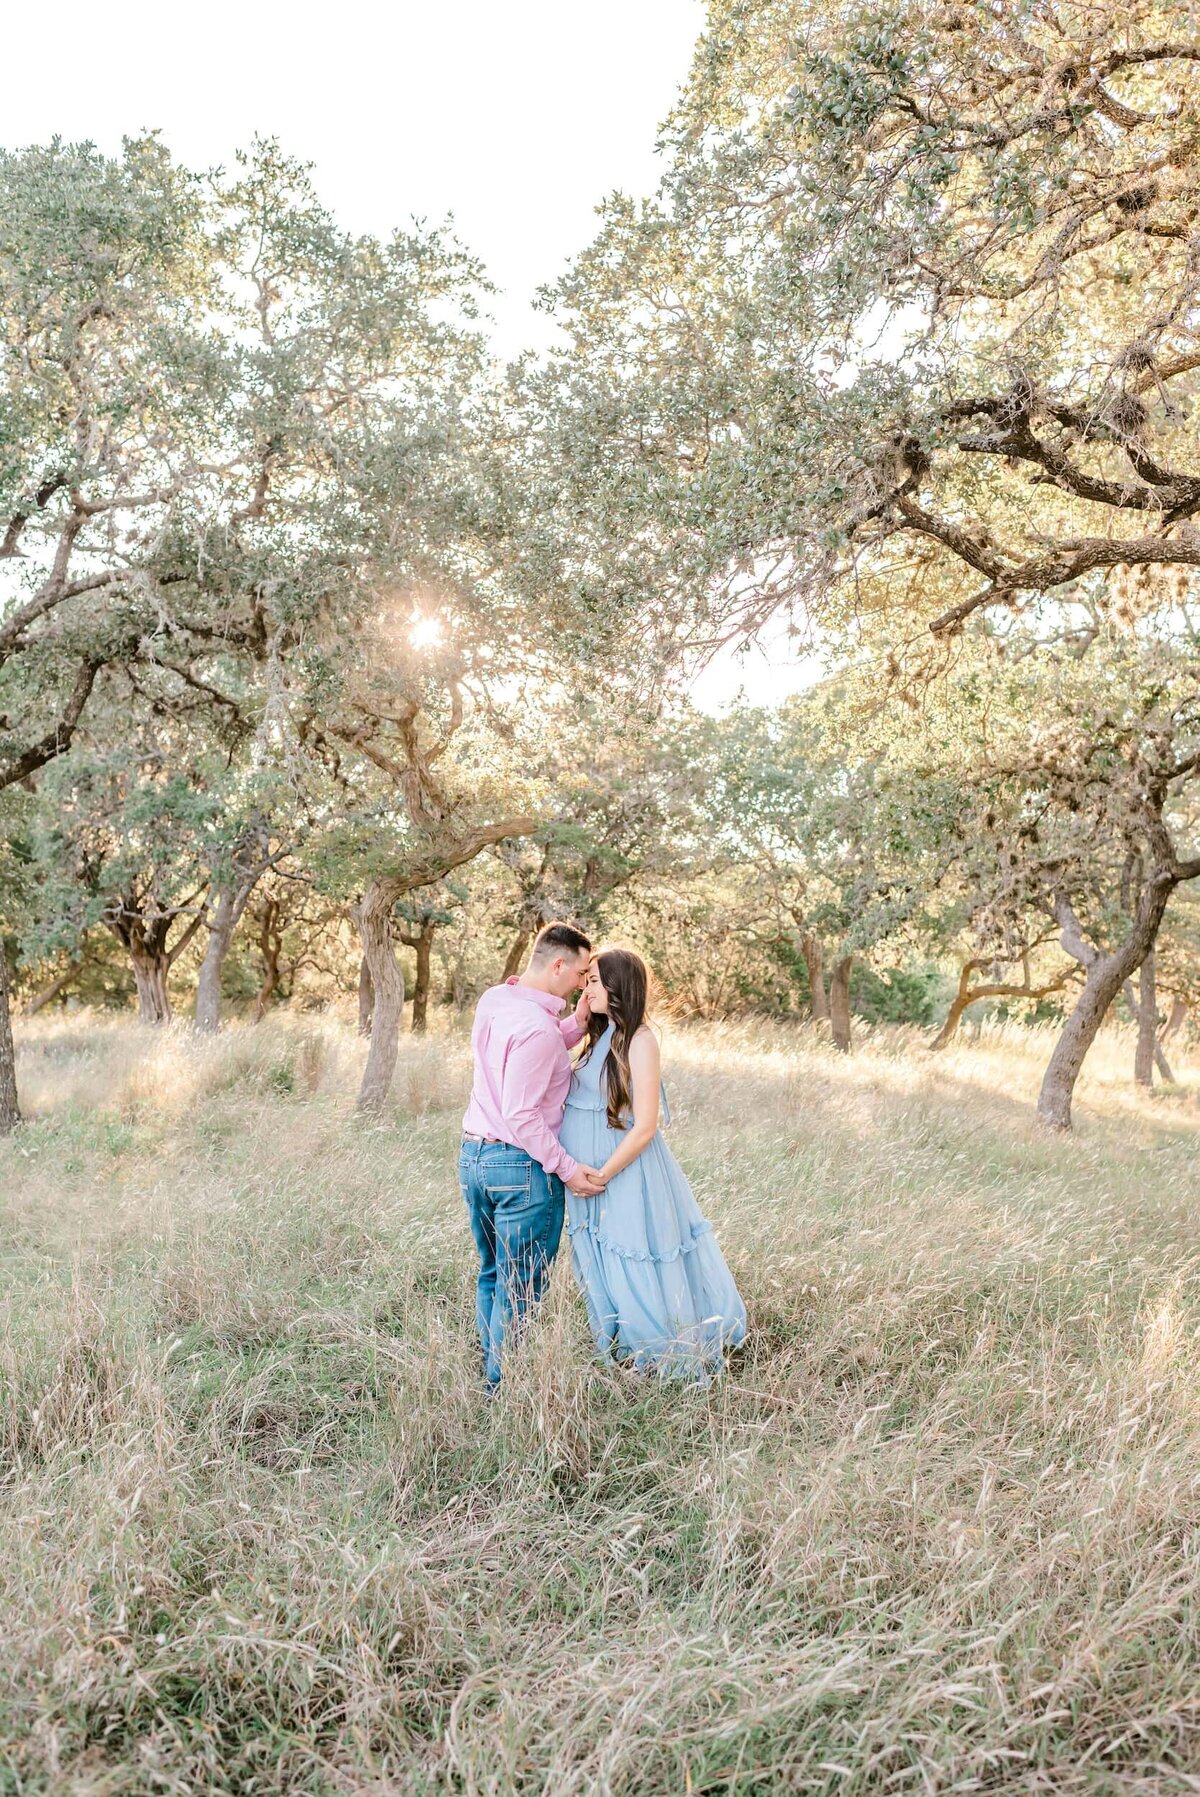 San-Antonio-Maternity-Photography-11.17.21 Sarah Maternity - Laurie Adalle Photography-65